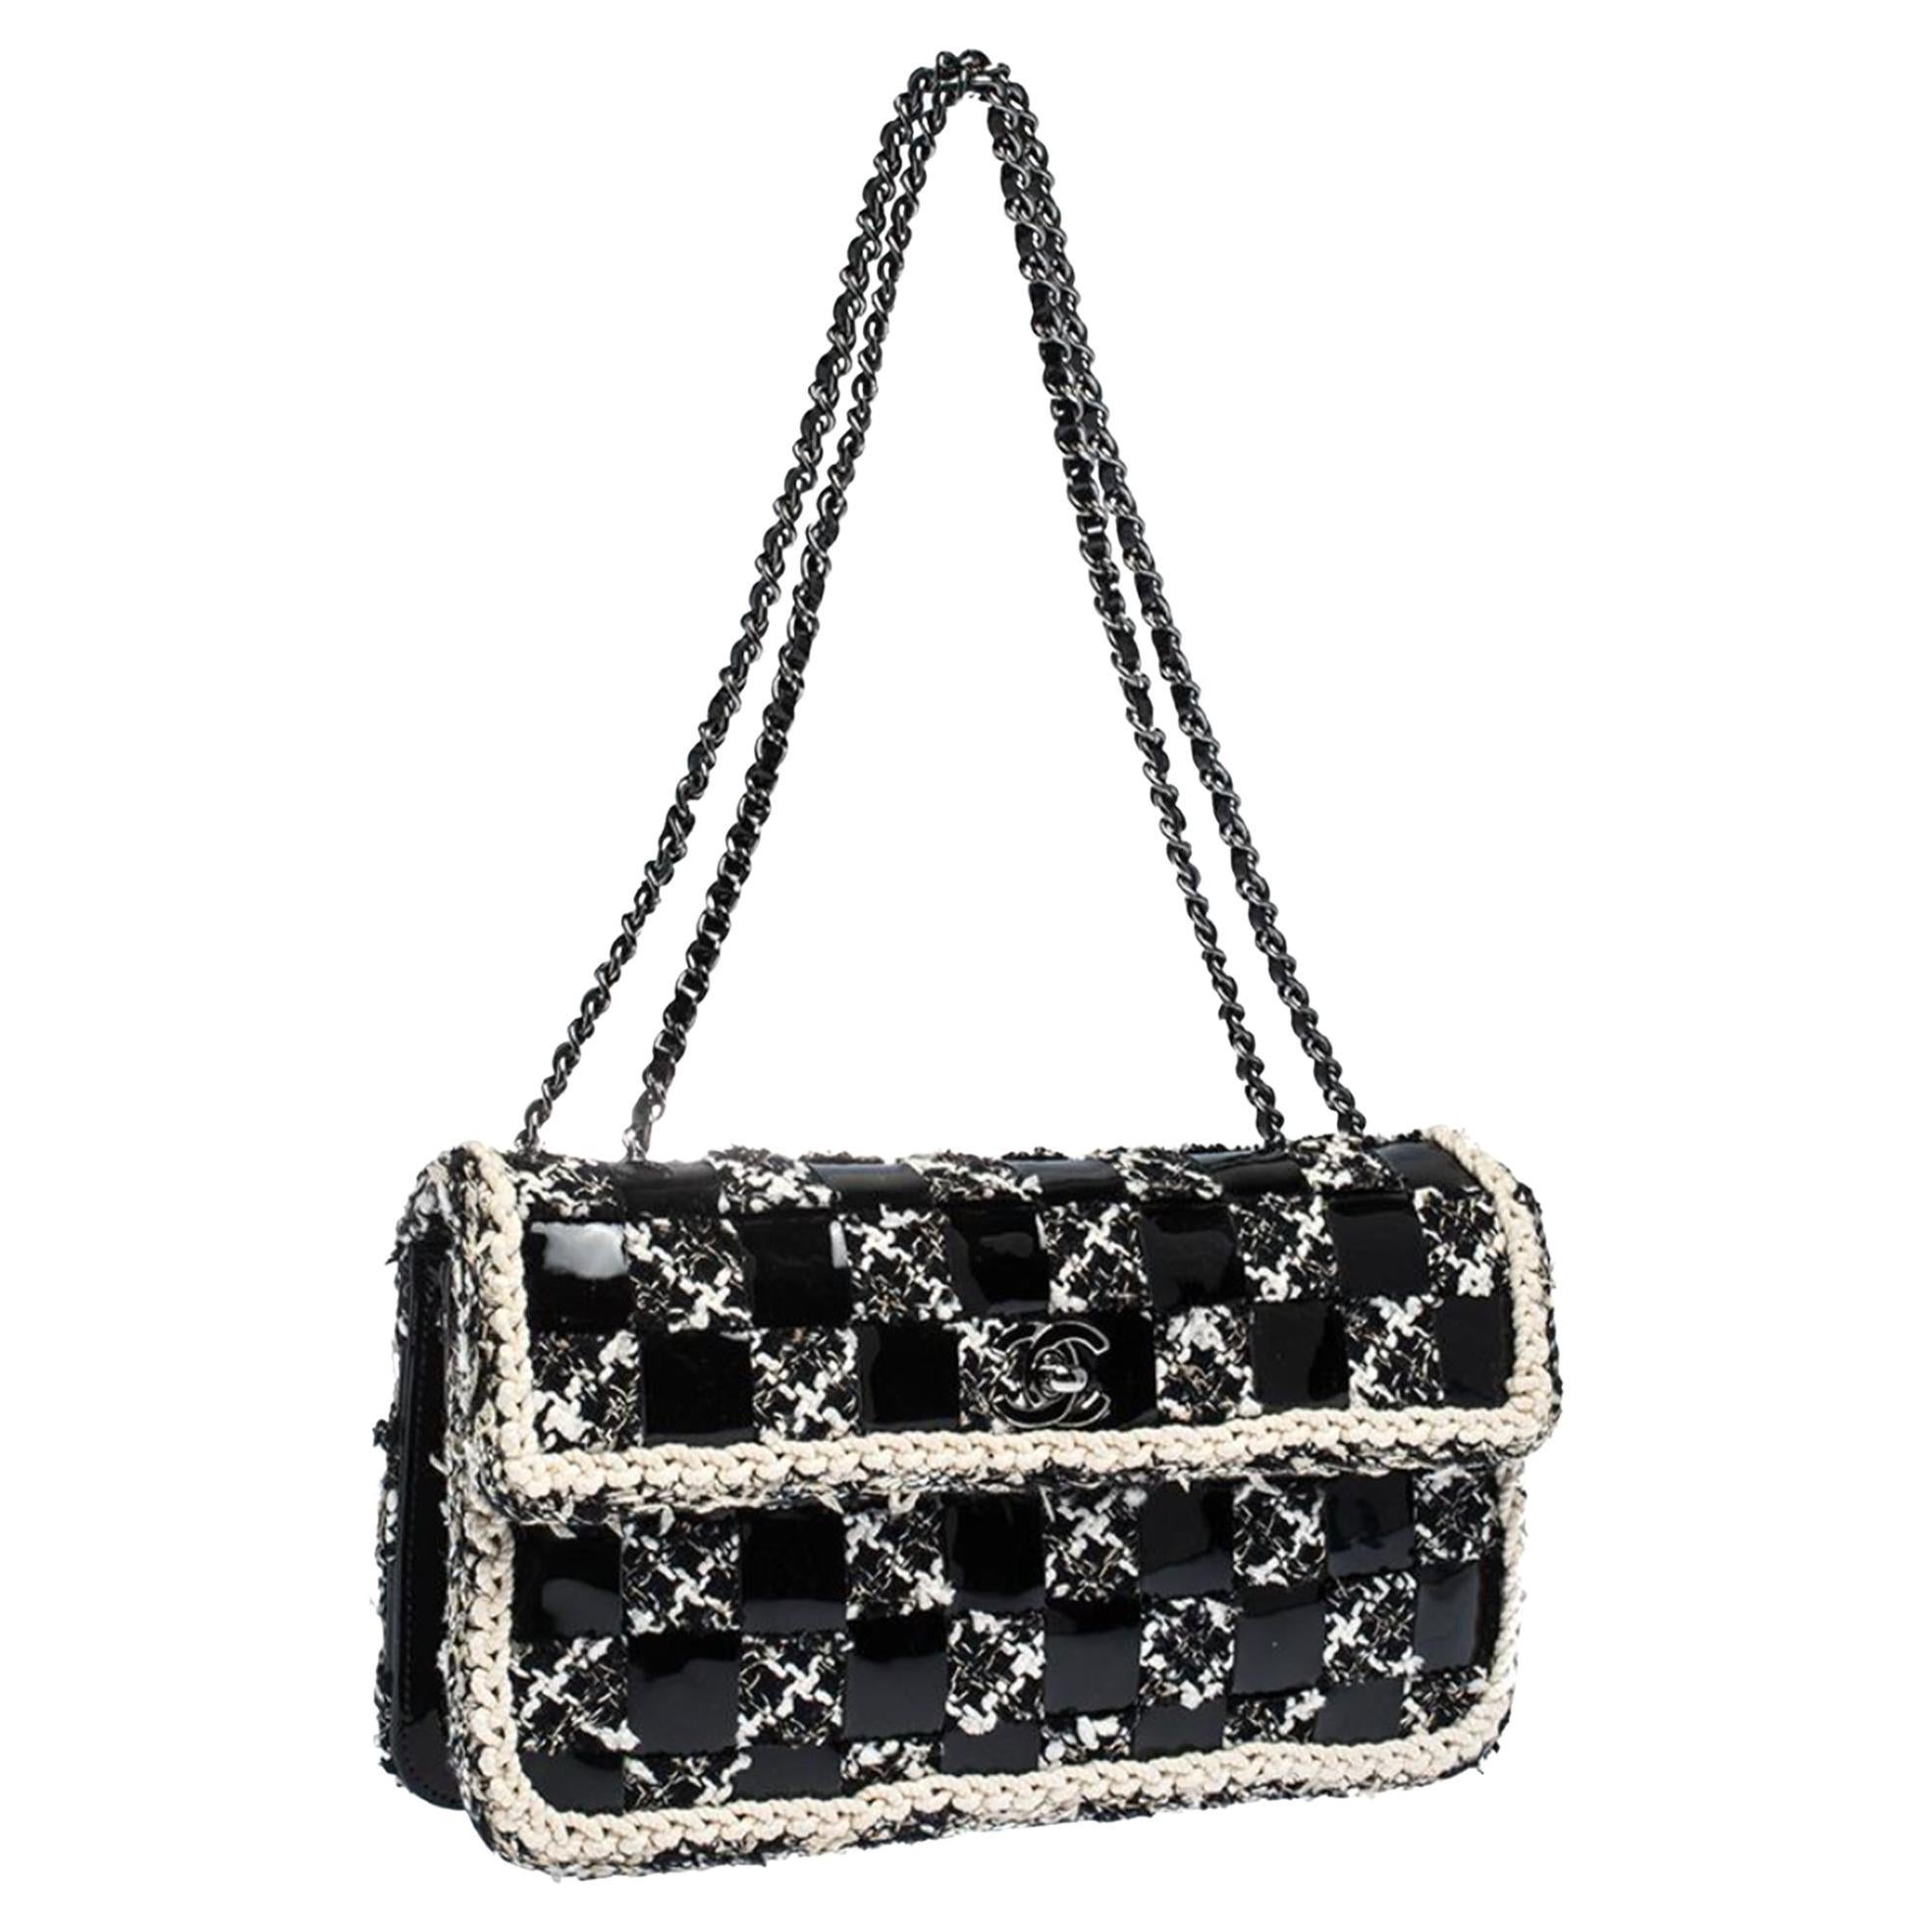 Chanel Black White Tweed Vintage Interwoven Classic Flap Bag

Year: 2004-2005

Black and creme tweed Chanel Small Flap bag with ruthenium hardware, convertible shoulder strap with chain-link and patent leather accents, woven patent leather detailing